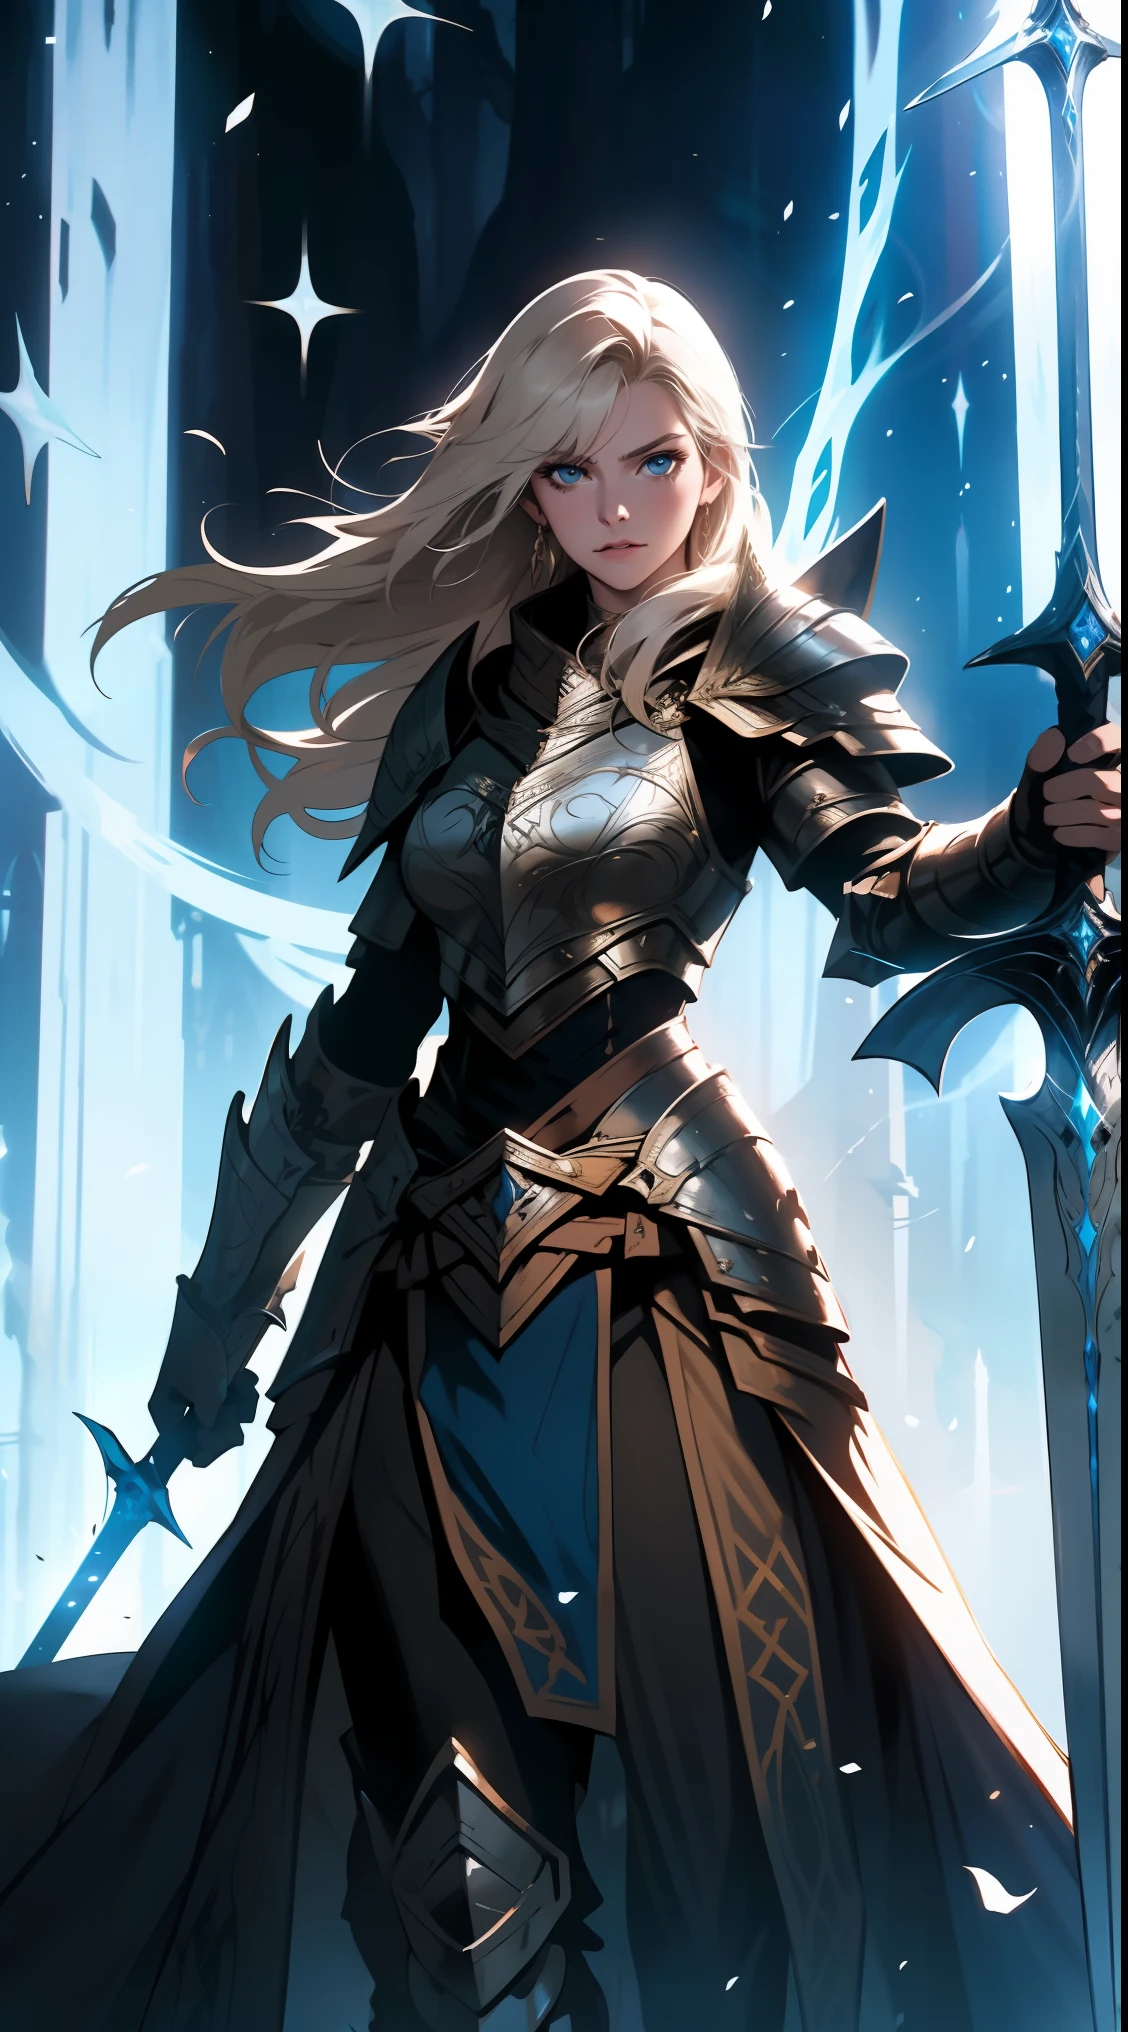 fantasy, epic, movie poster-style illustration, a girl standing in armor, with a dynamic and magical background, featuring prominent and well-designed typography elements,standing, confident, determined, wielding a sword, epic title, magical forest, glowing runes, bold text
